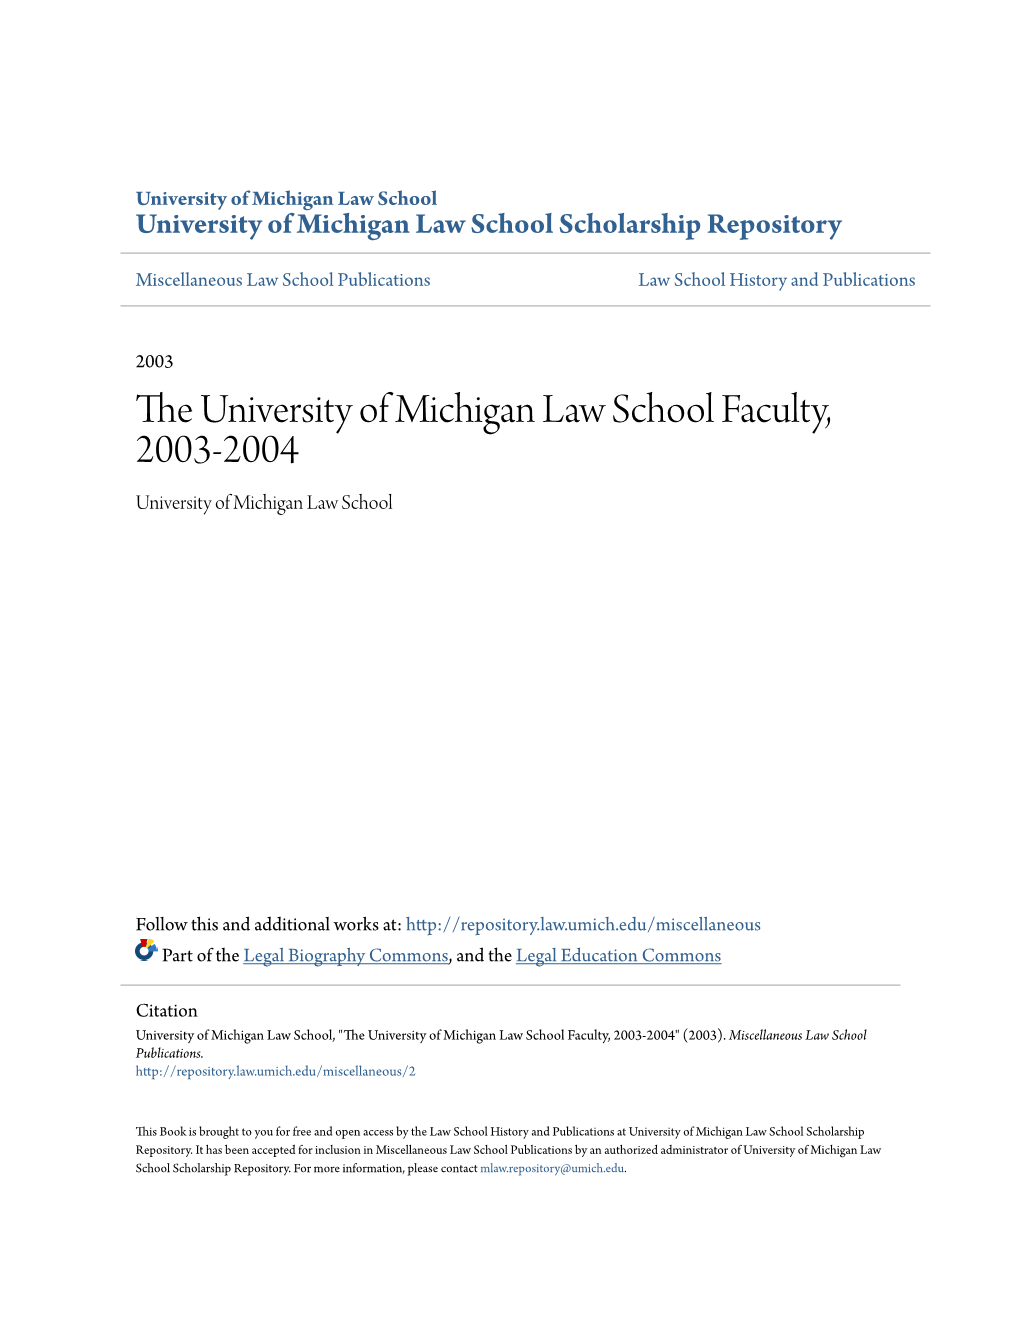 The University of Michigan Law School Faculty, 2003-2004